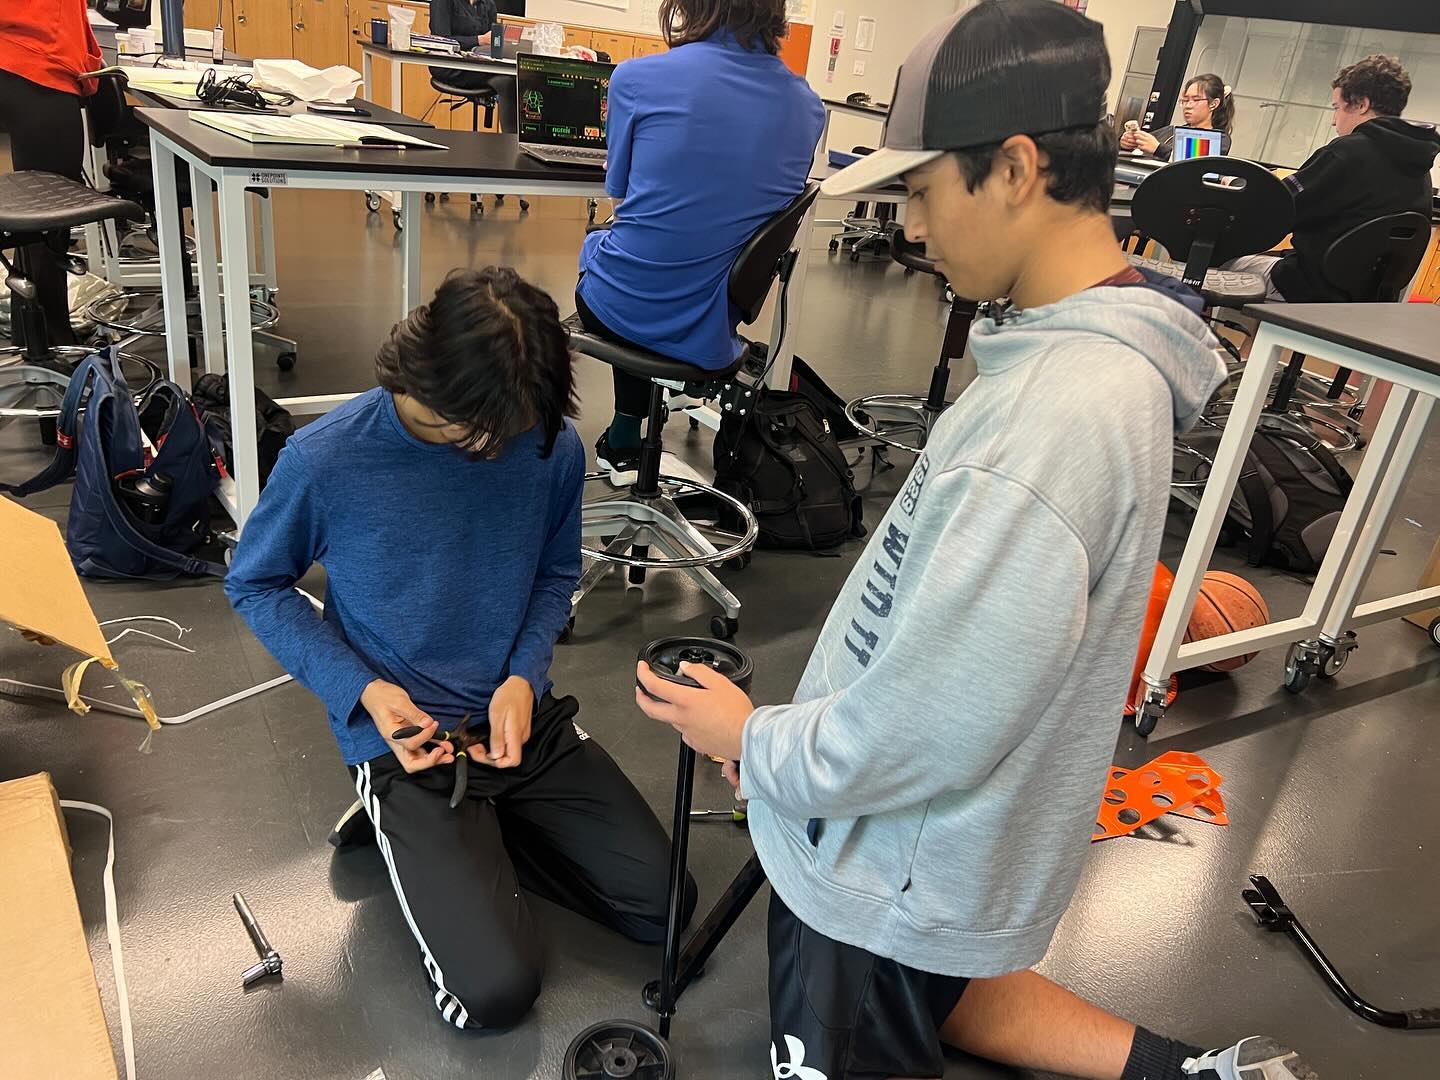 HARD AT WORK. Juniors Rohan Kharbanda and Humza Jameel work together to build a concrete mixer during an Advanced Science Research class. (Submitted Photo: Rohan Kharbanda)